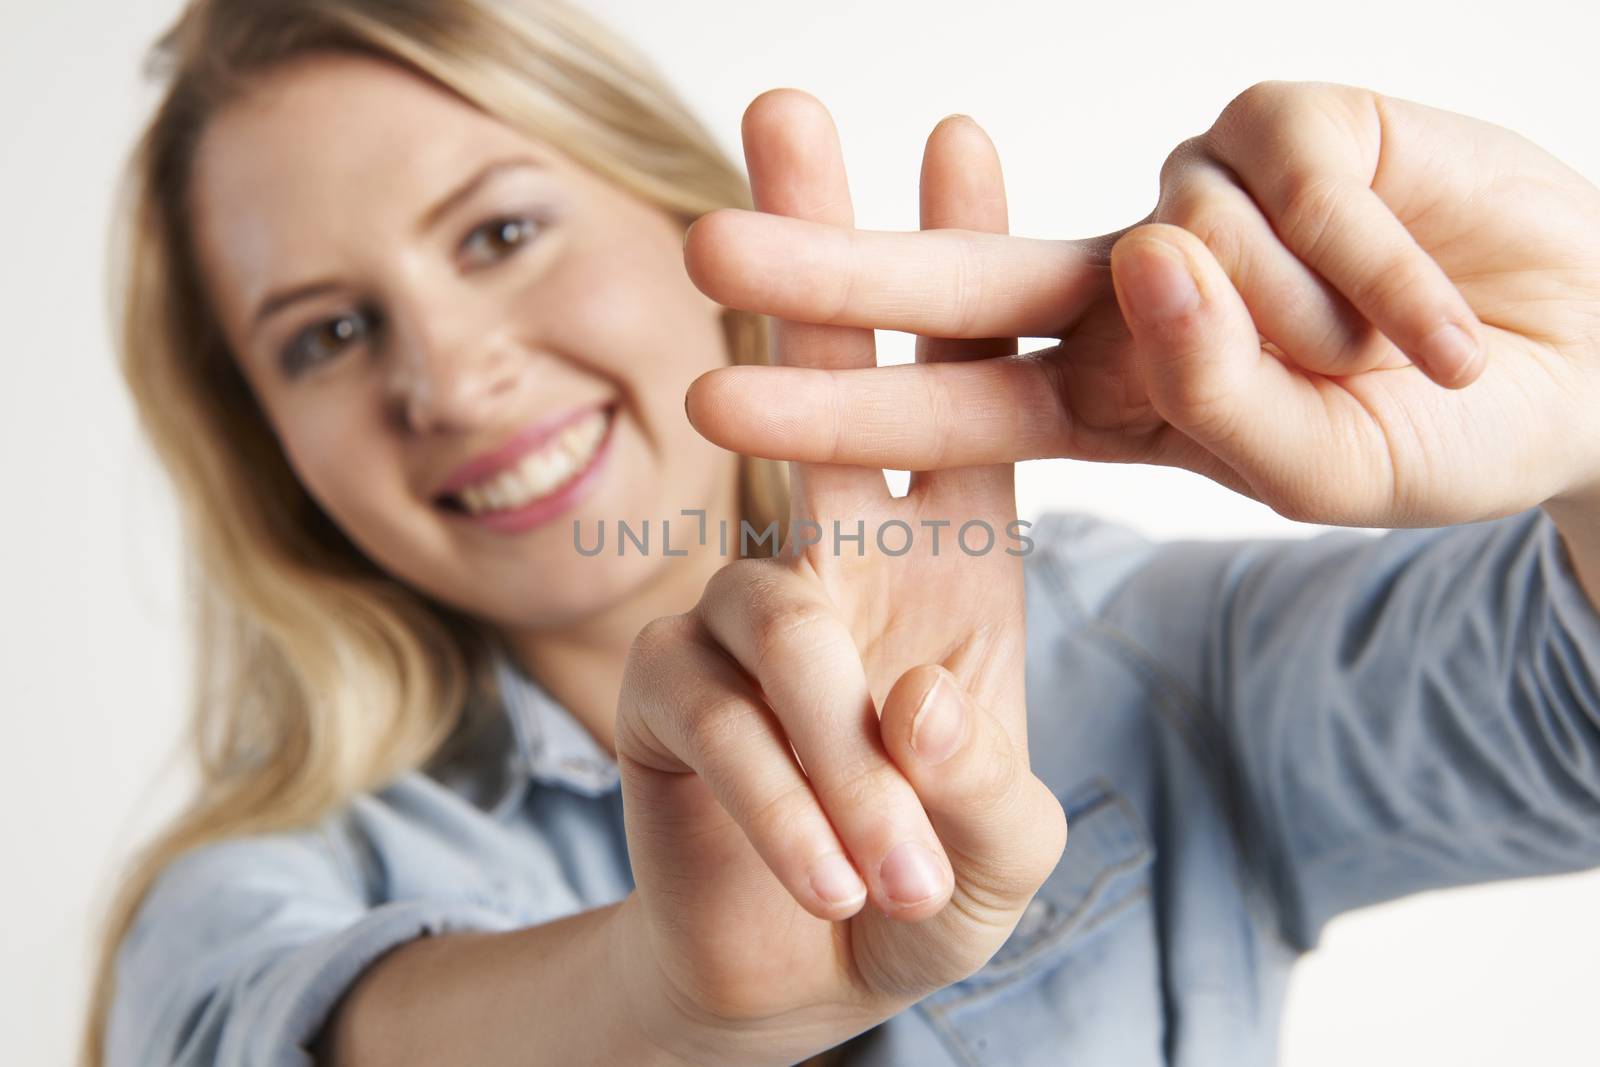 Pretty Girl Making Hashtag Sign With Fingers by HWS